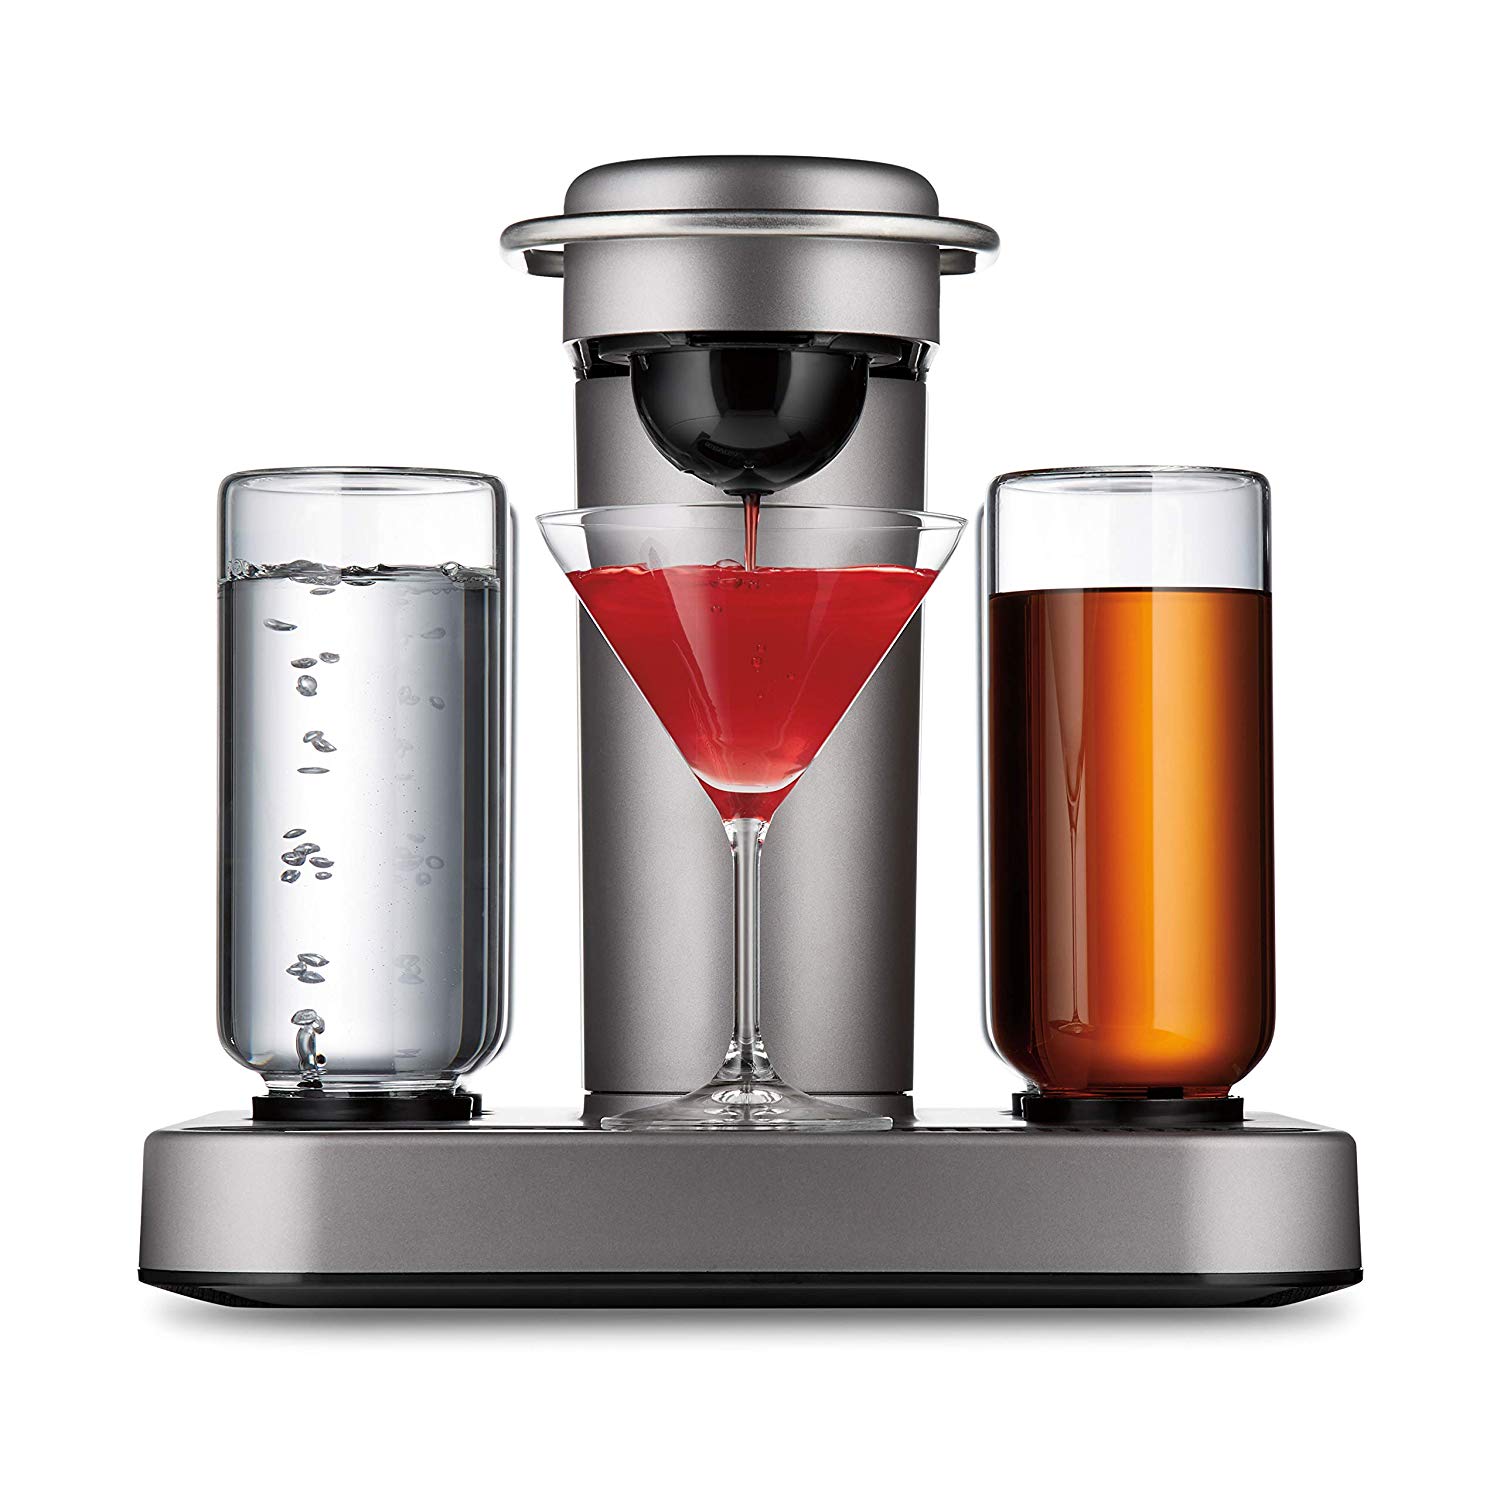 Bartesian Premium Cocktail and Margarita Machine for the Home Bar with Push-Button Simplicity and an Easy to Clean Design, $349 @amazon.com